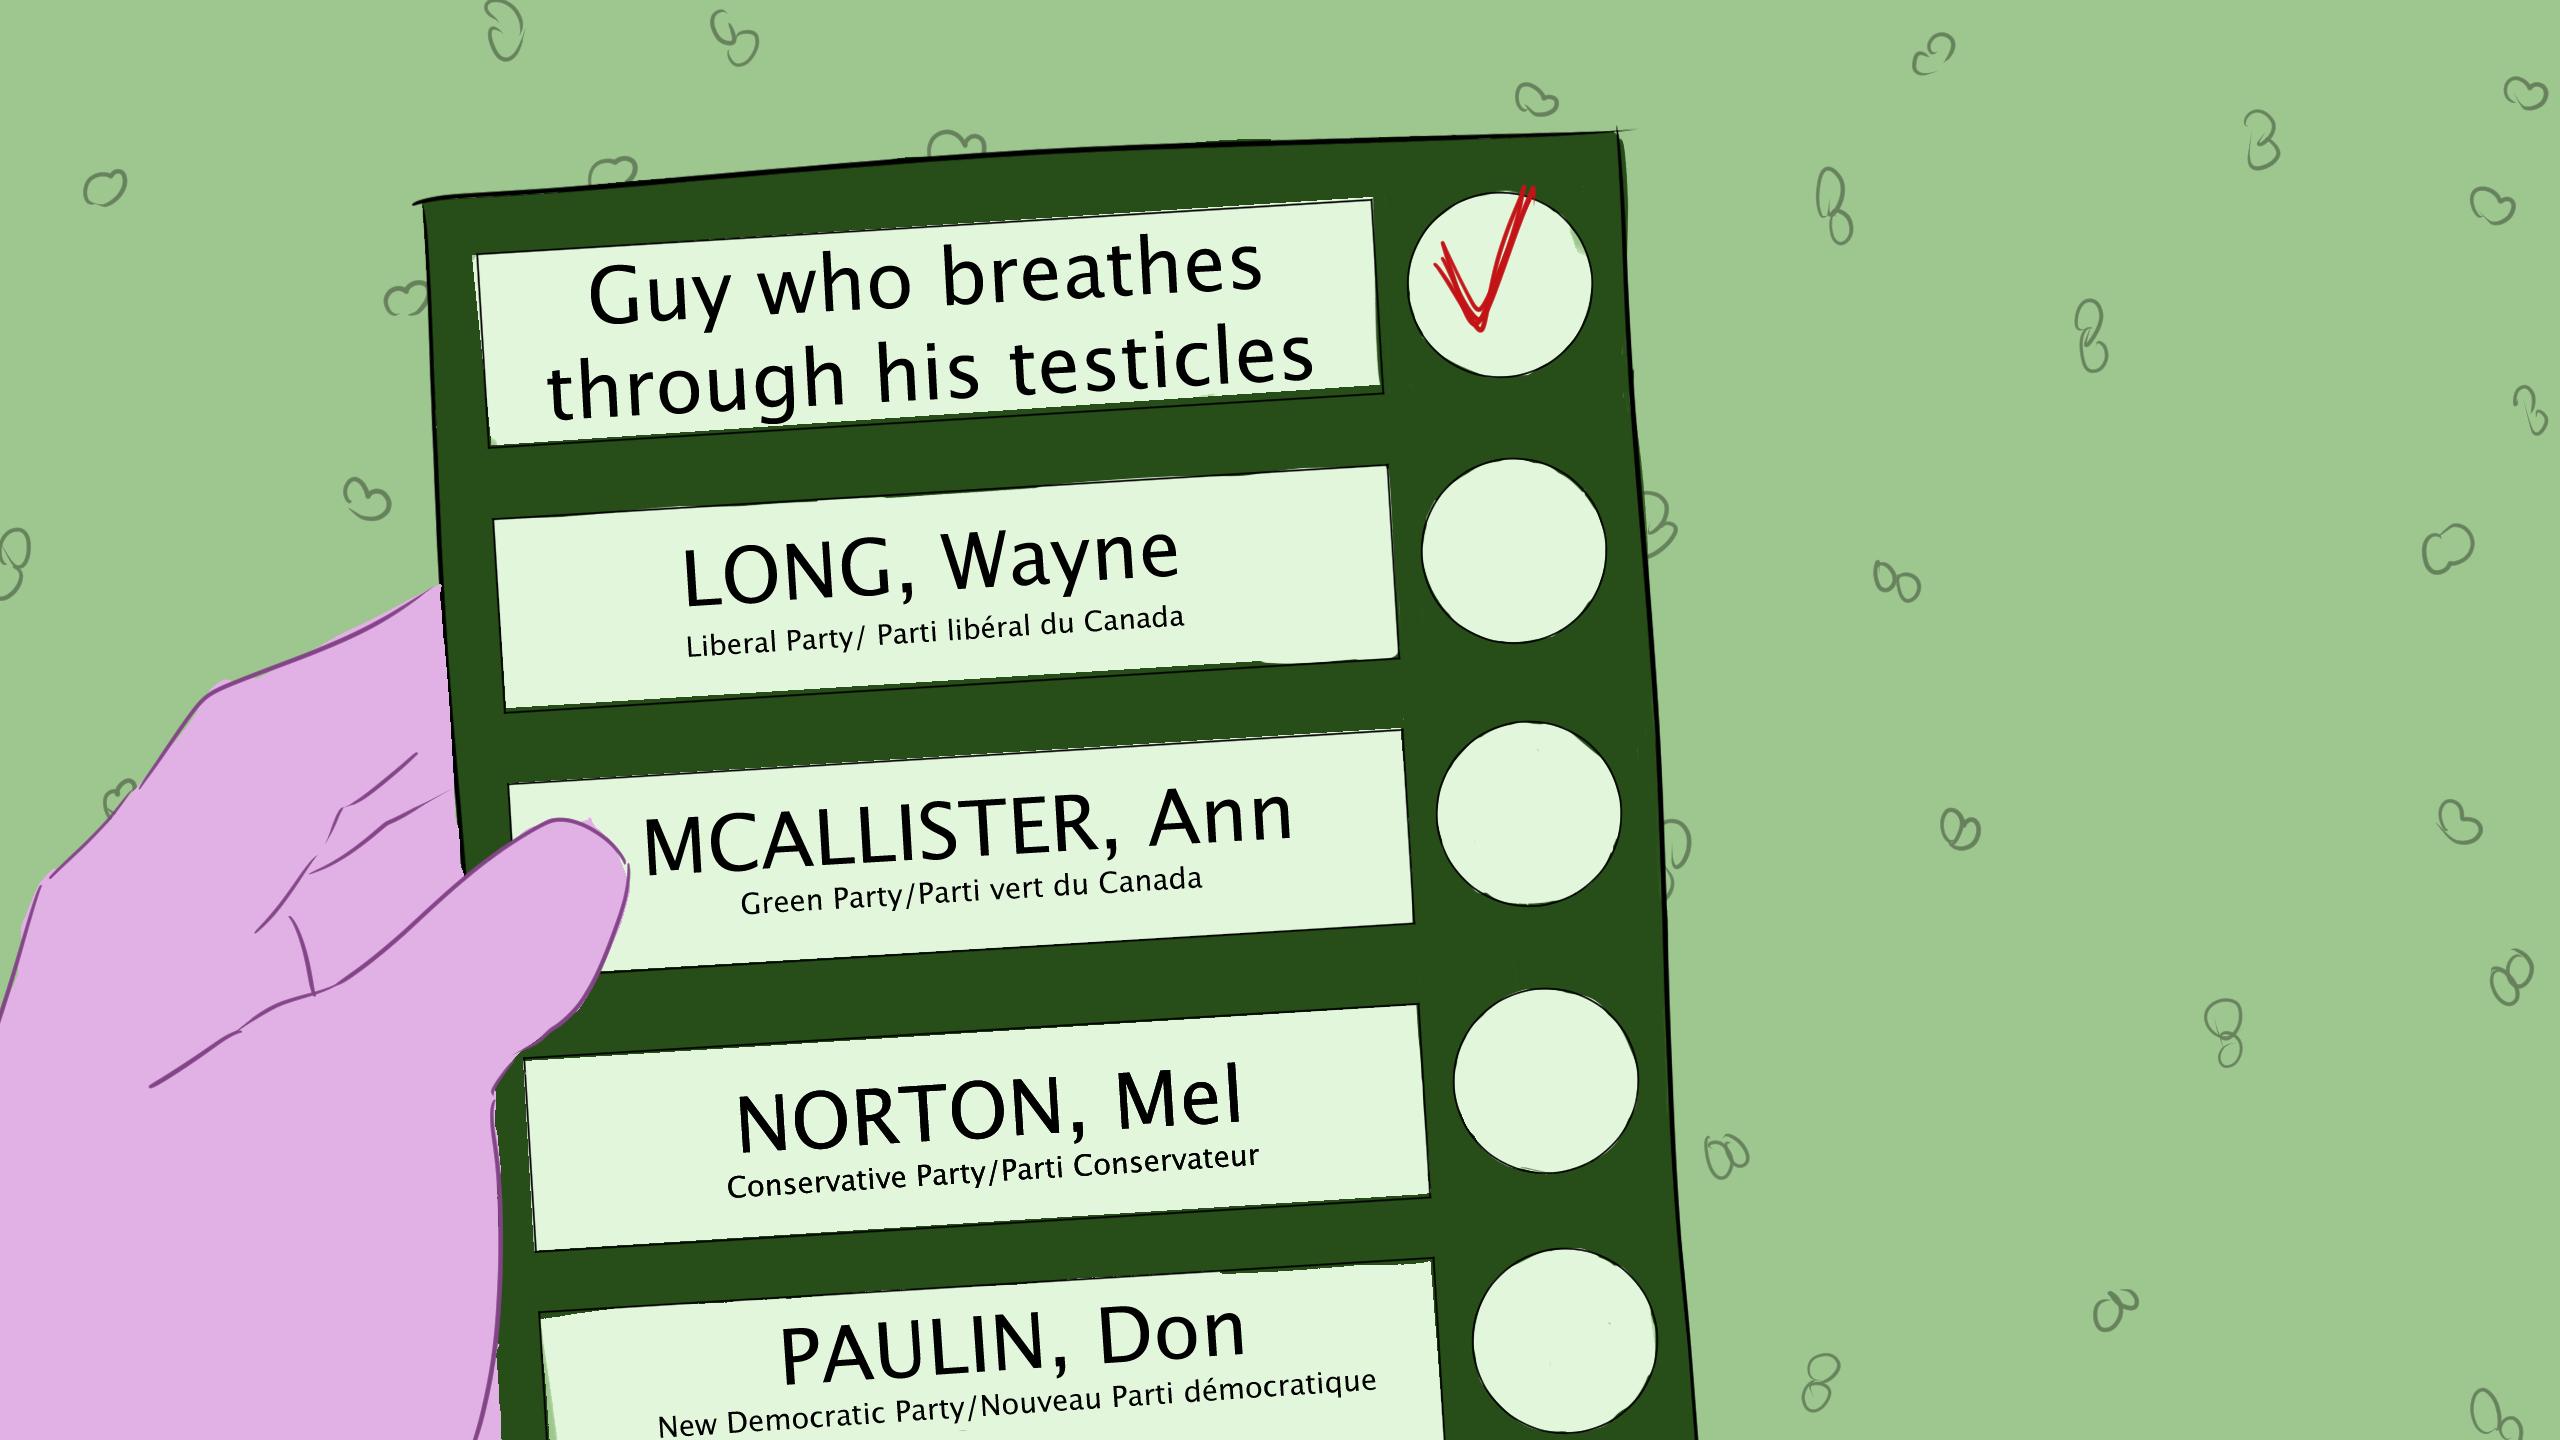 Image of a voting ballot where the person has checked off "Guy who breathes through his testicles"